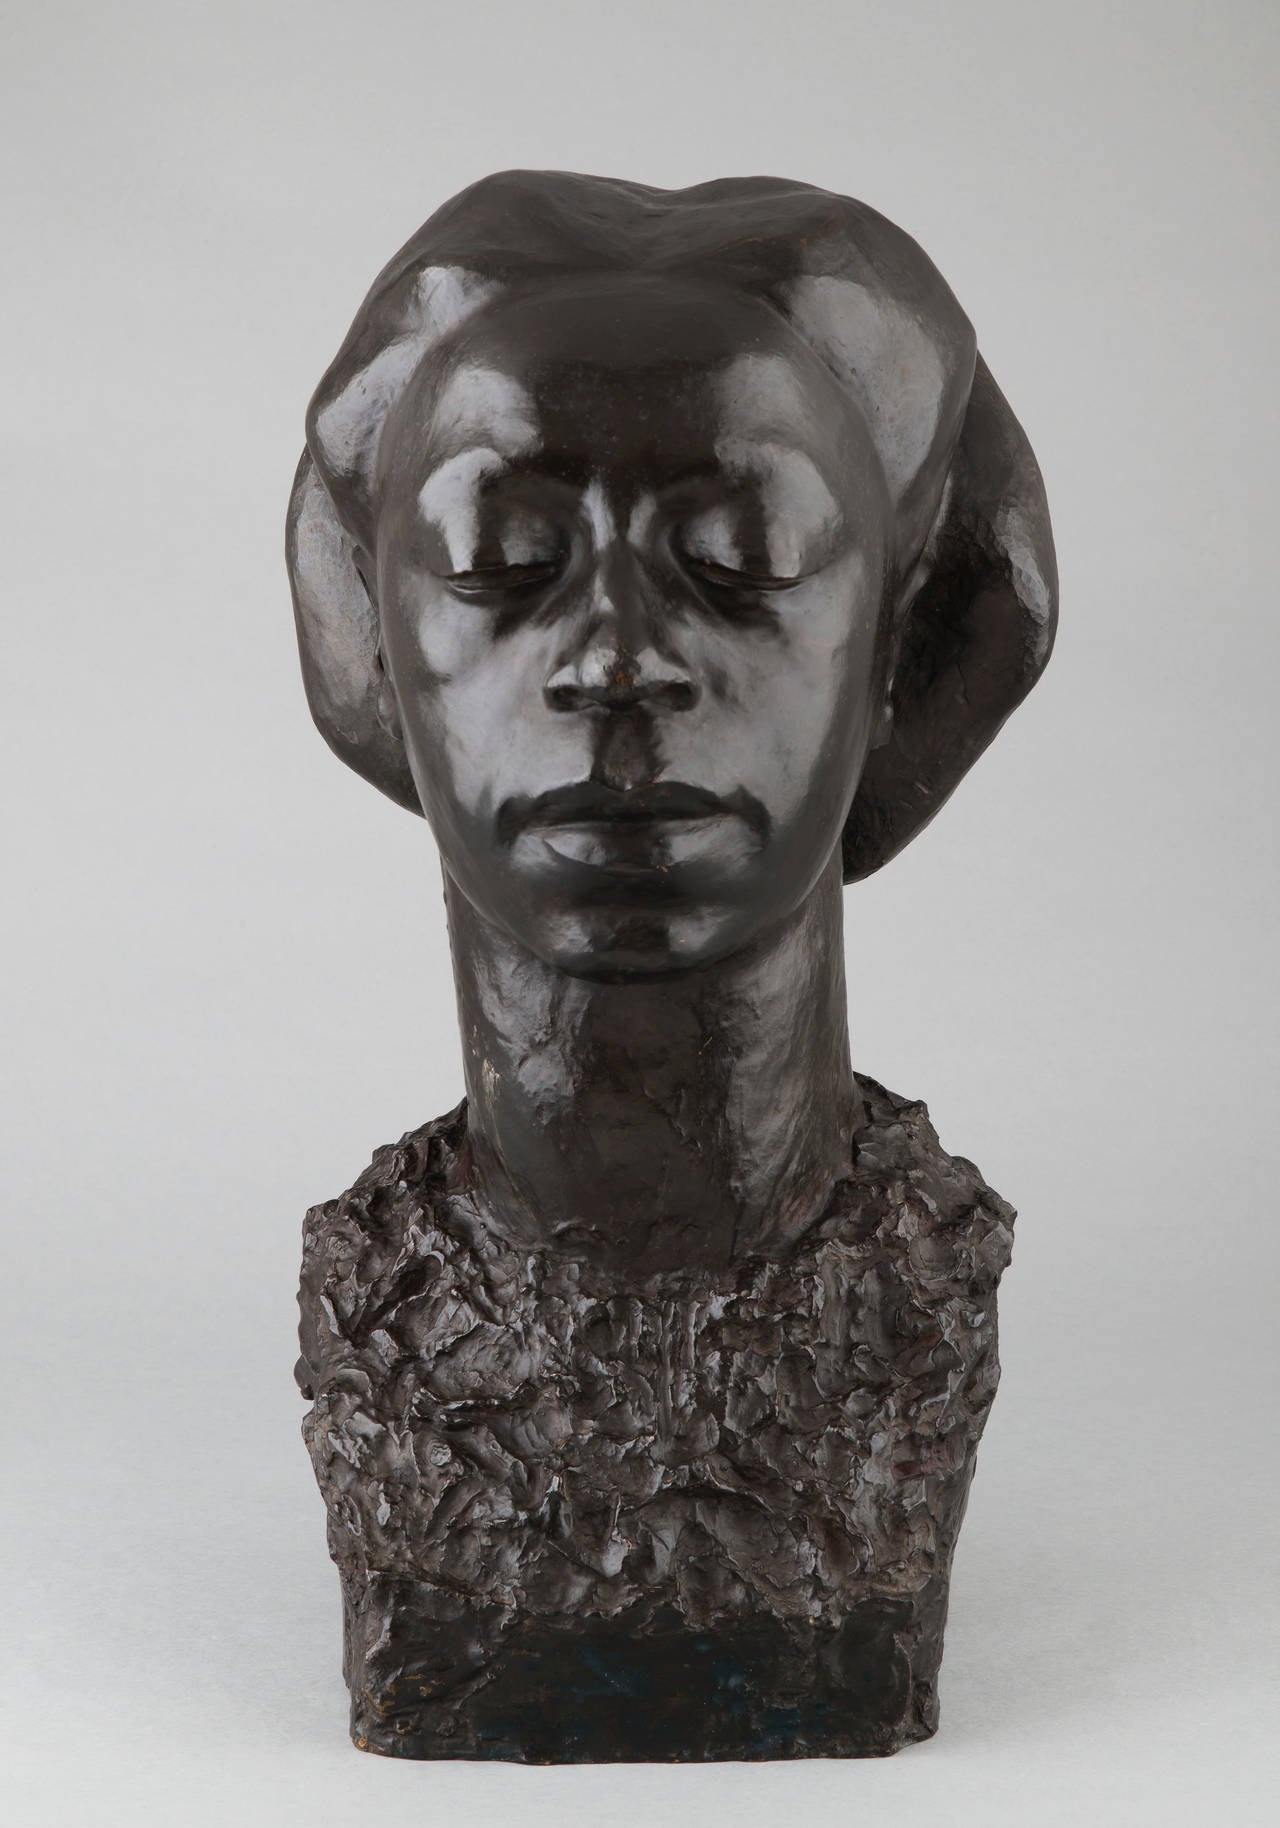 Jeanne Tercafs
(1898-1944).

Bust of an African woman.
Genuine bronze sculpture with a dark patina.

Signed 'Tercafs'
with the foundry mark 'Fonderie Andro, Paris'
Belgian School,
circa 1935.

Student at the academies of Liege and